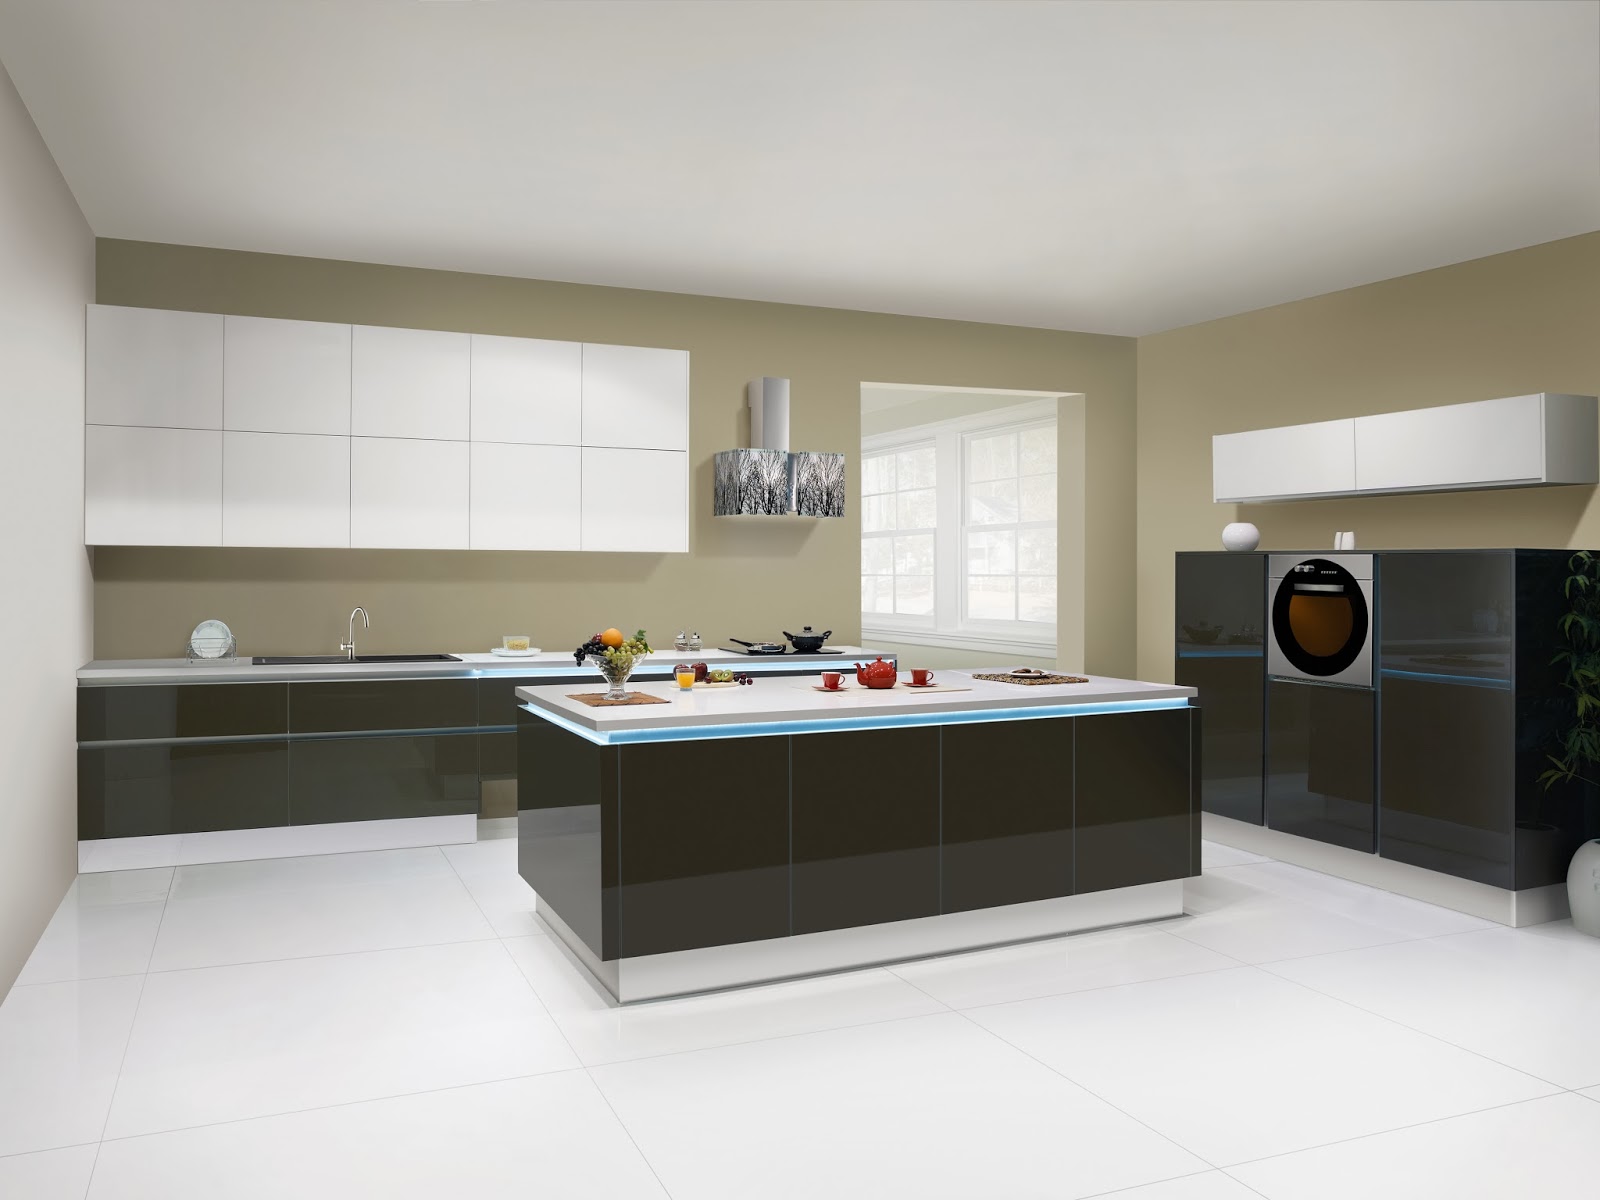 Modular kitchens, the new vogue in market How to